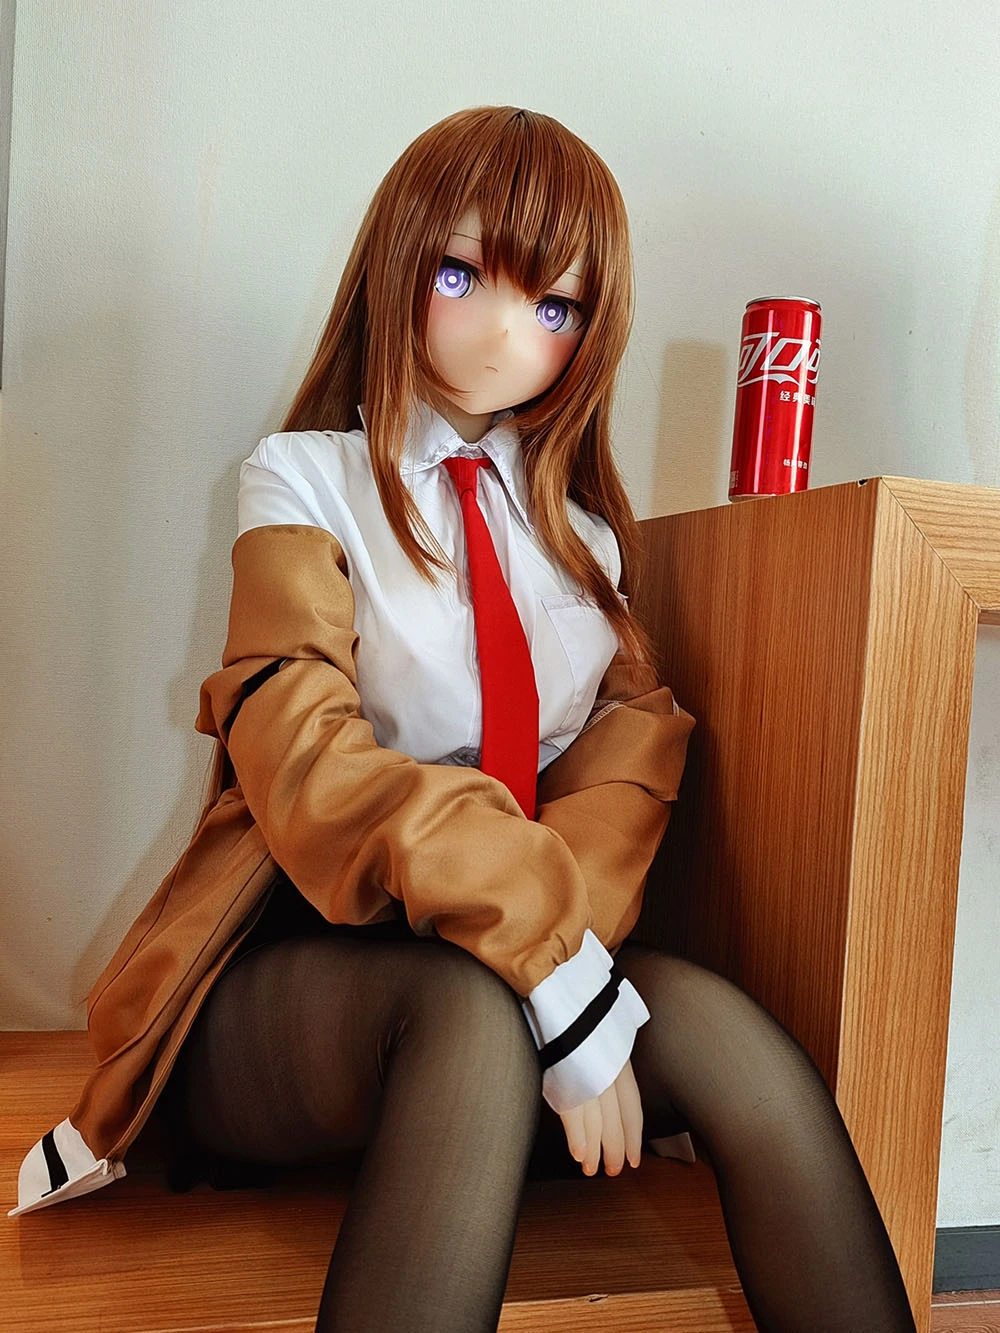 real young sexdoll sitting